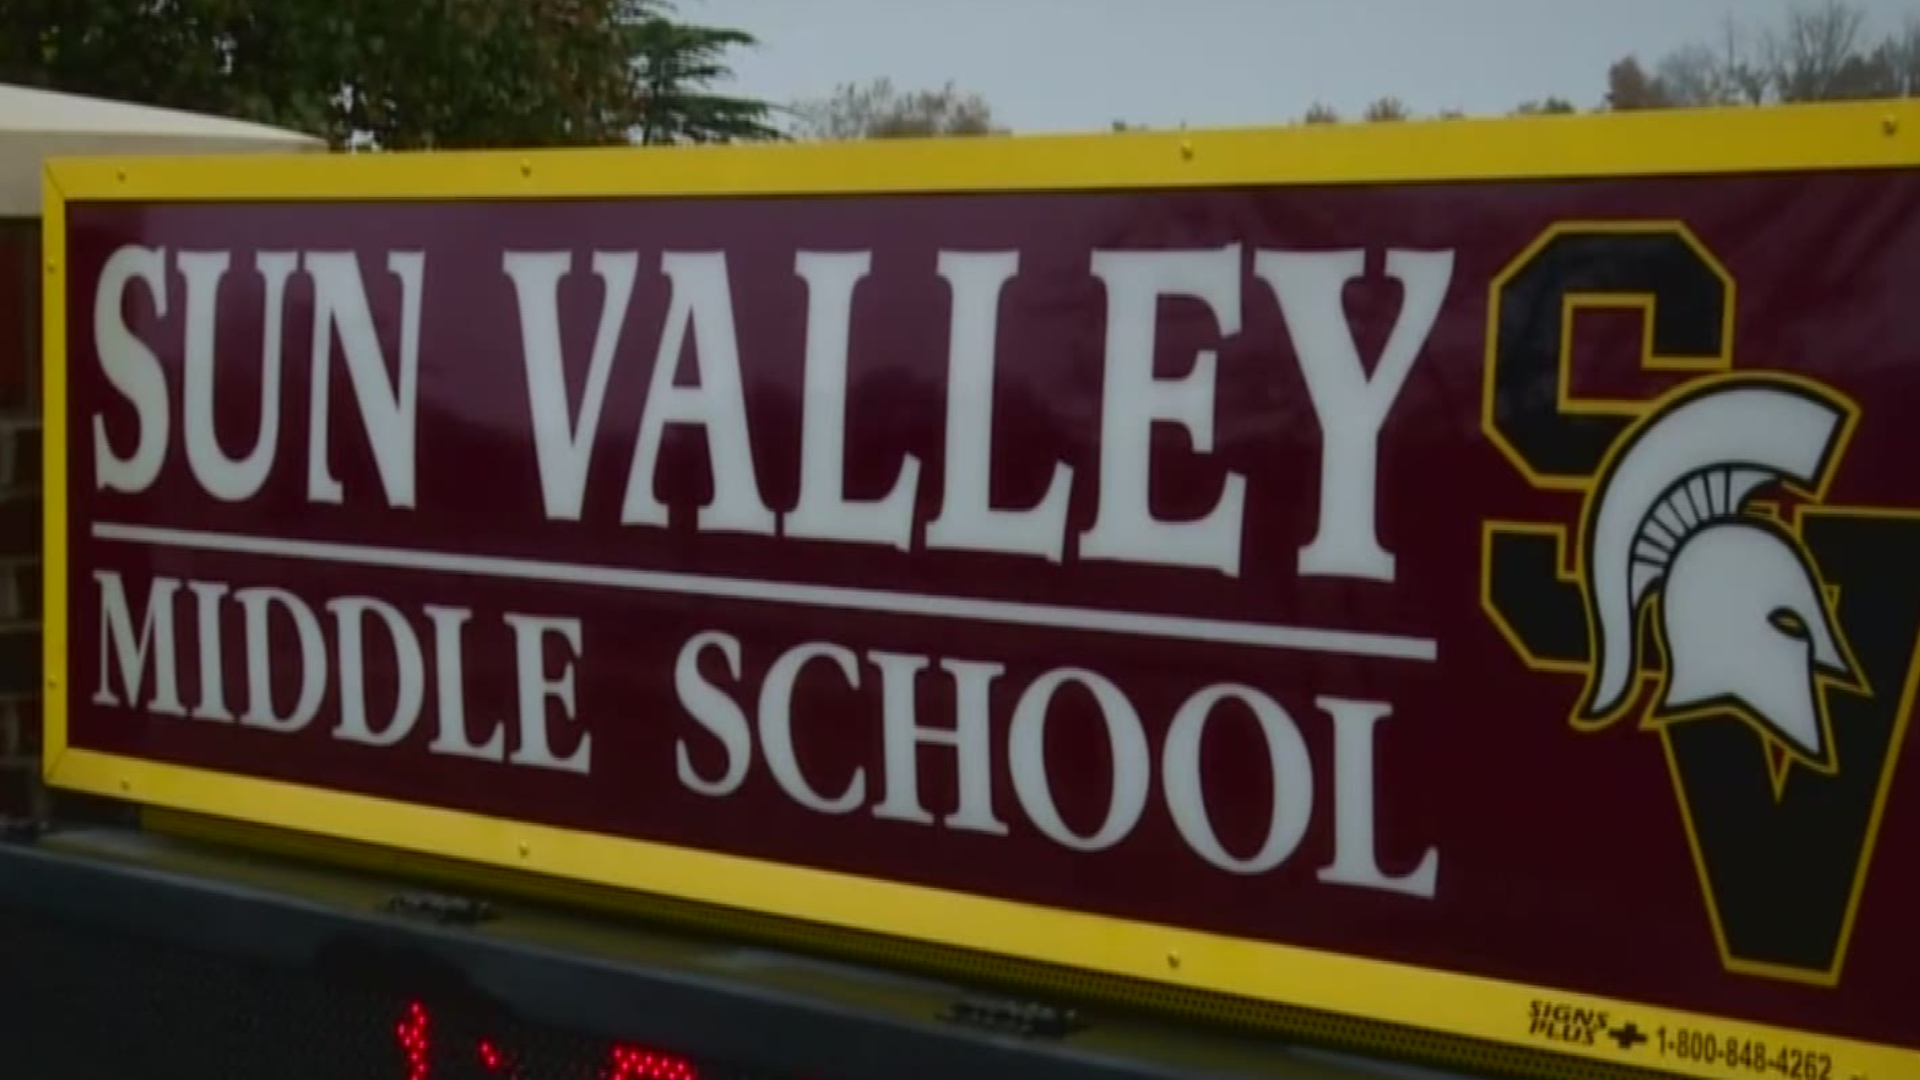 A Sun Valley Middle School football player is recovering after suffering a serious injury during a game on Saturday.